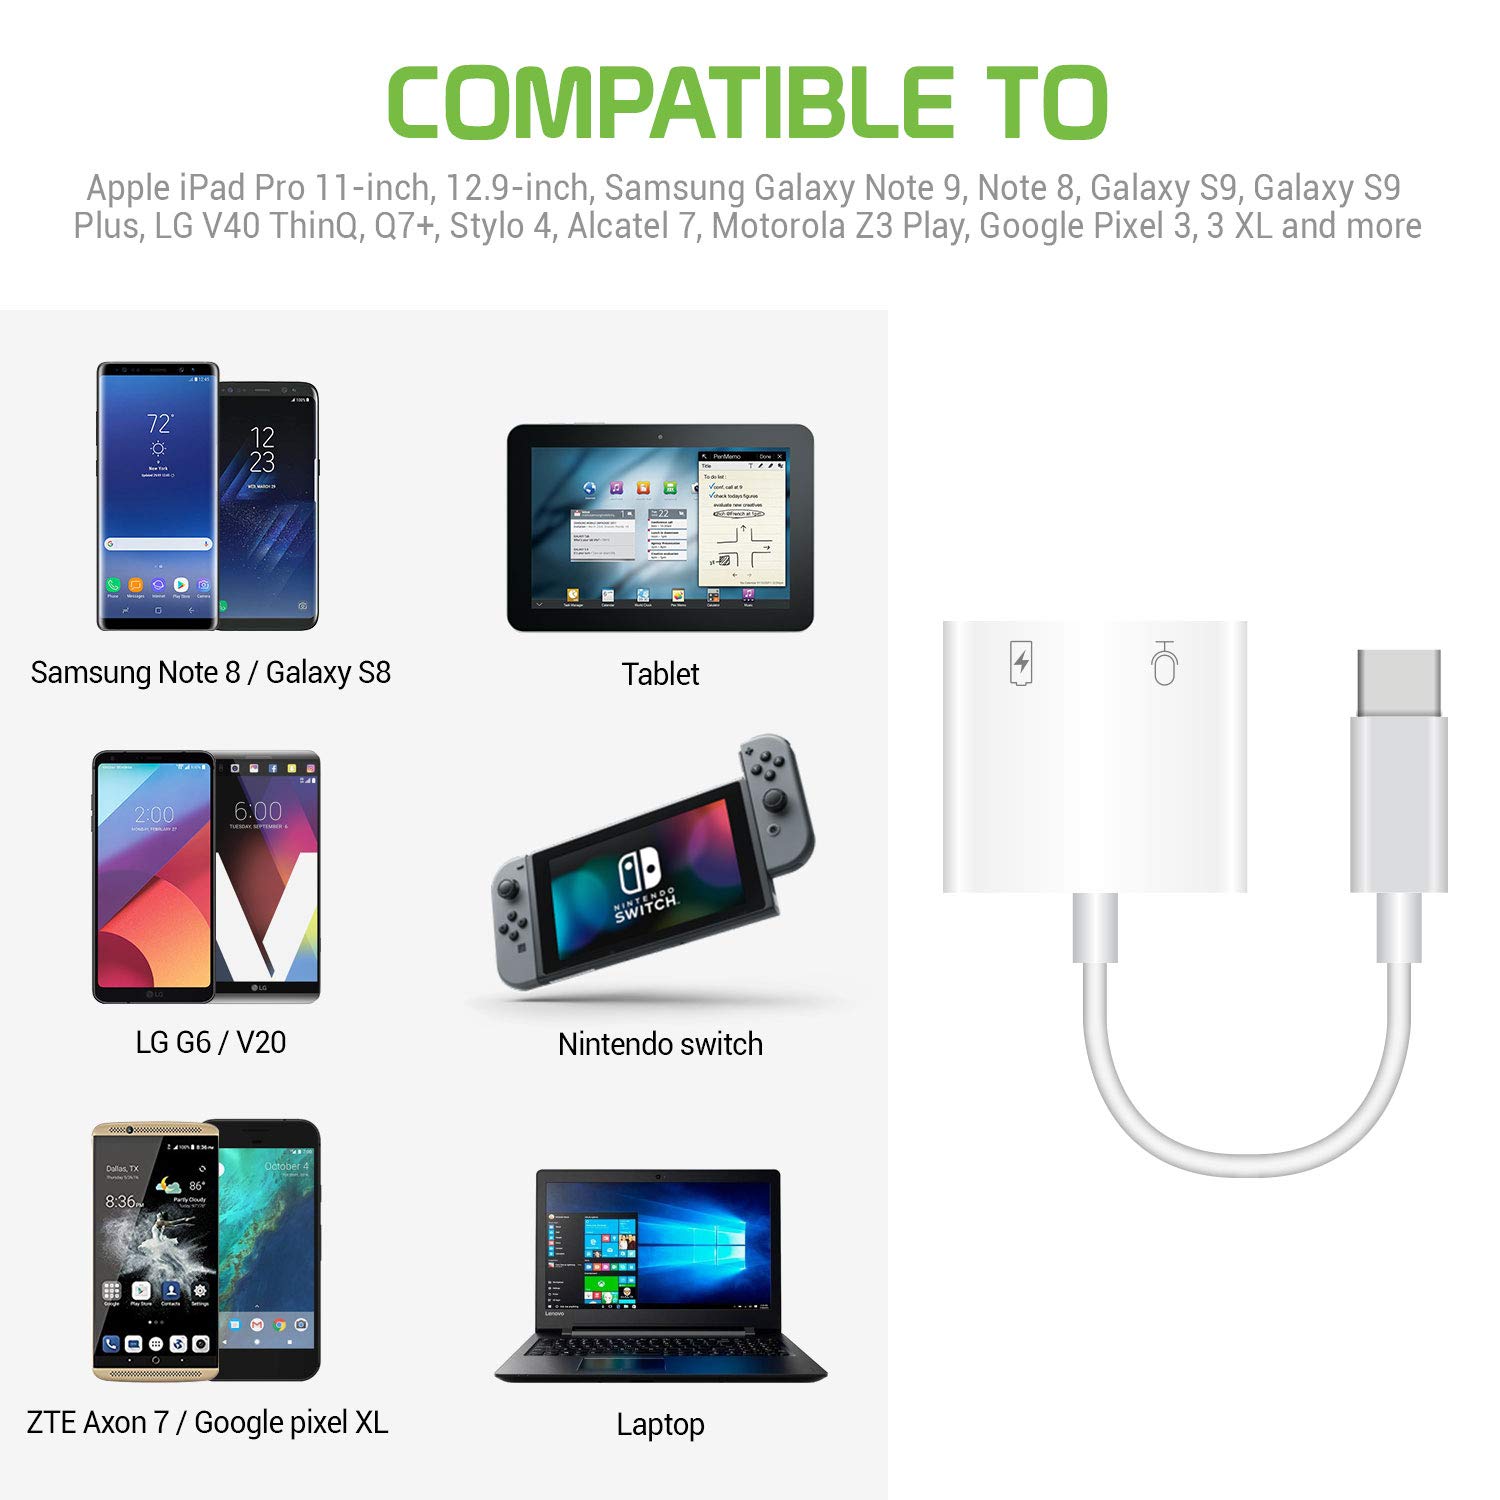 Cellet 3.5mm Aux Audio Adapter Type C USB Enhanced Quality Sound Compatible to iPad Pro 11-inch/12.9-inch Samsung Galaxy S20 Ultra 5G S10 S9 Note 10+ 10 9 Google Pixel 4XL 4 3 3XL MacBook Pro Air